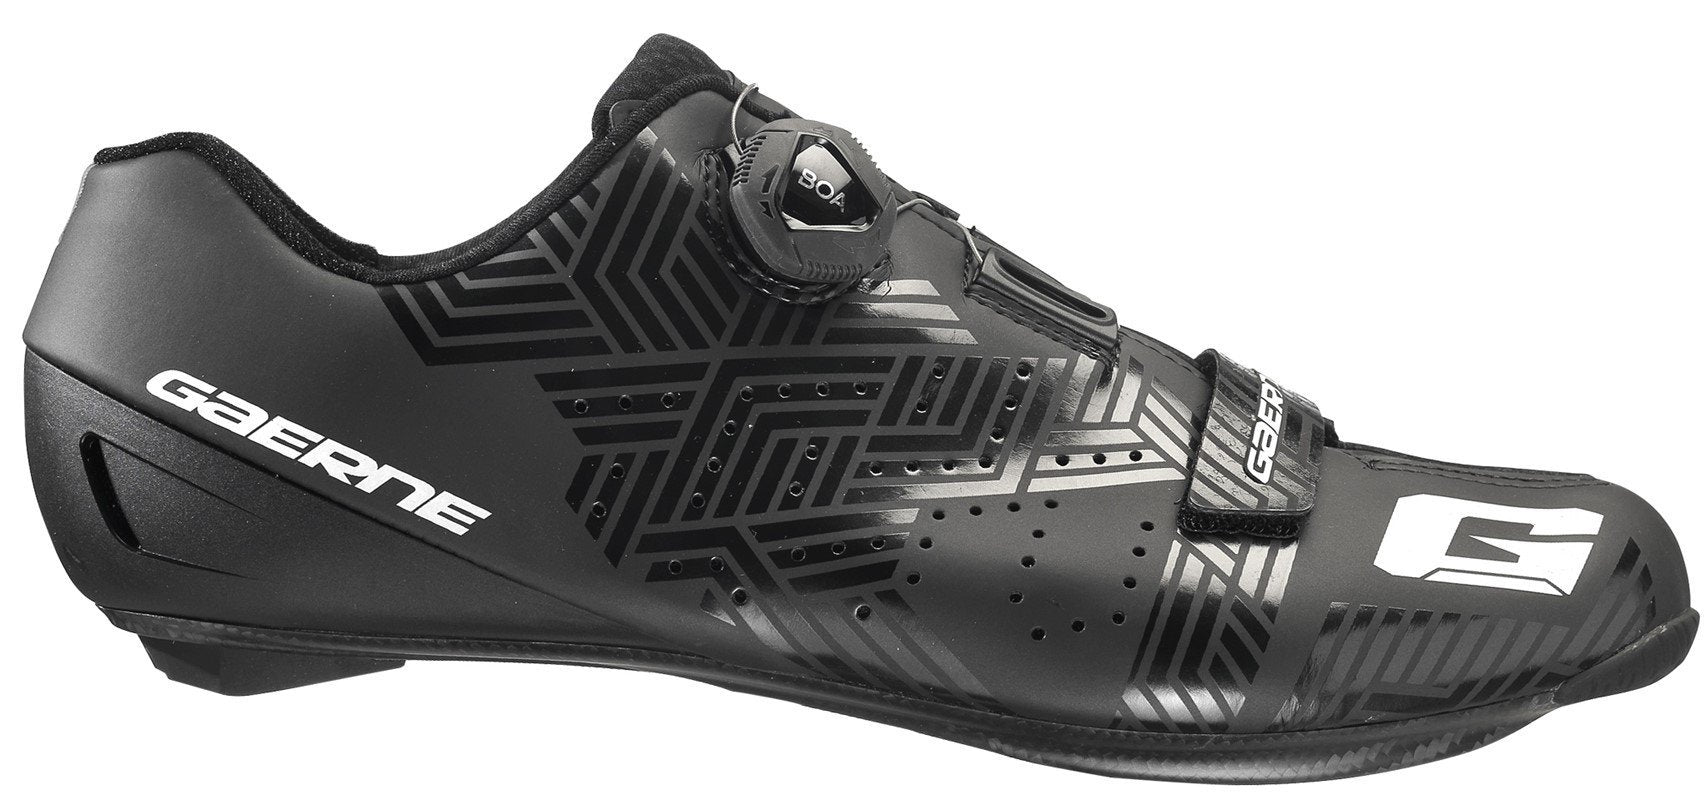 G.Volata road shoes Gaerne shoes 